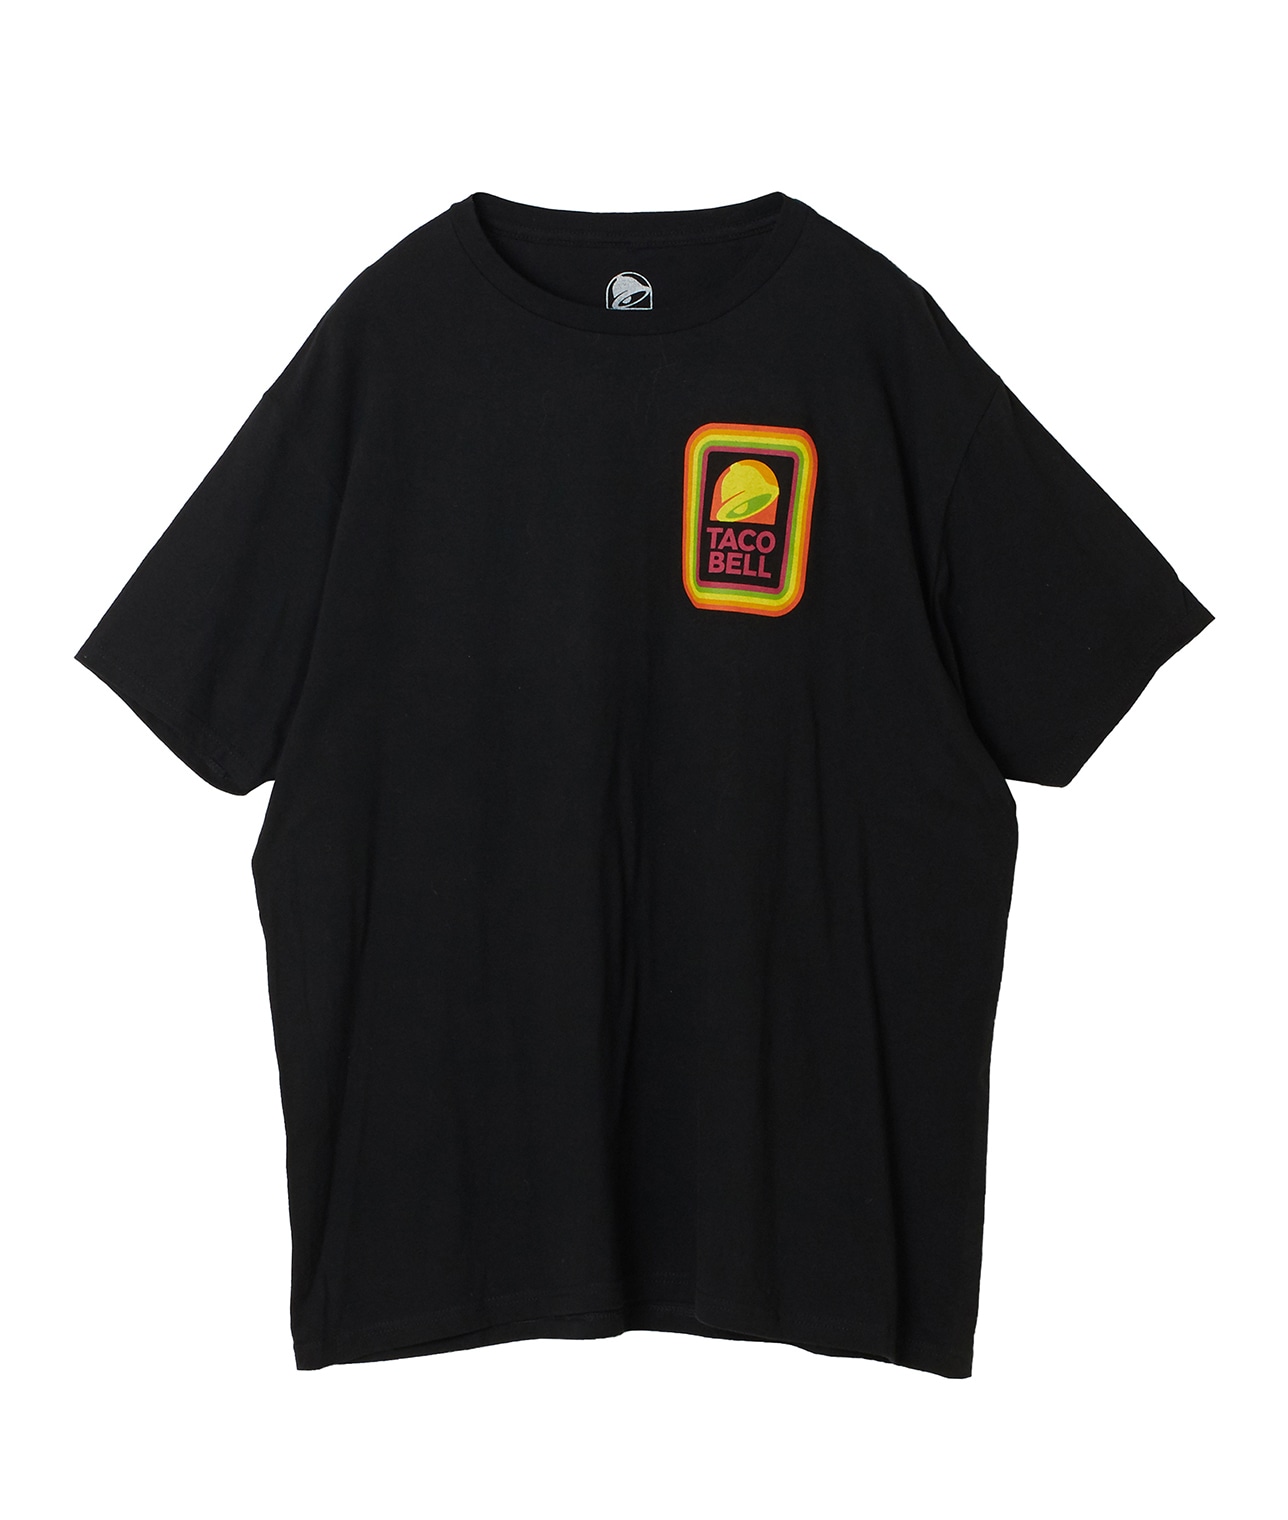 USED/TACO BELL/プリントTシャツ 詳細画像 BLACK 1